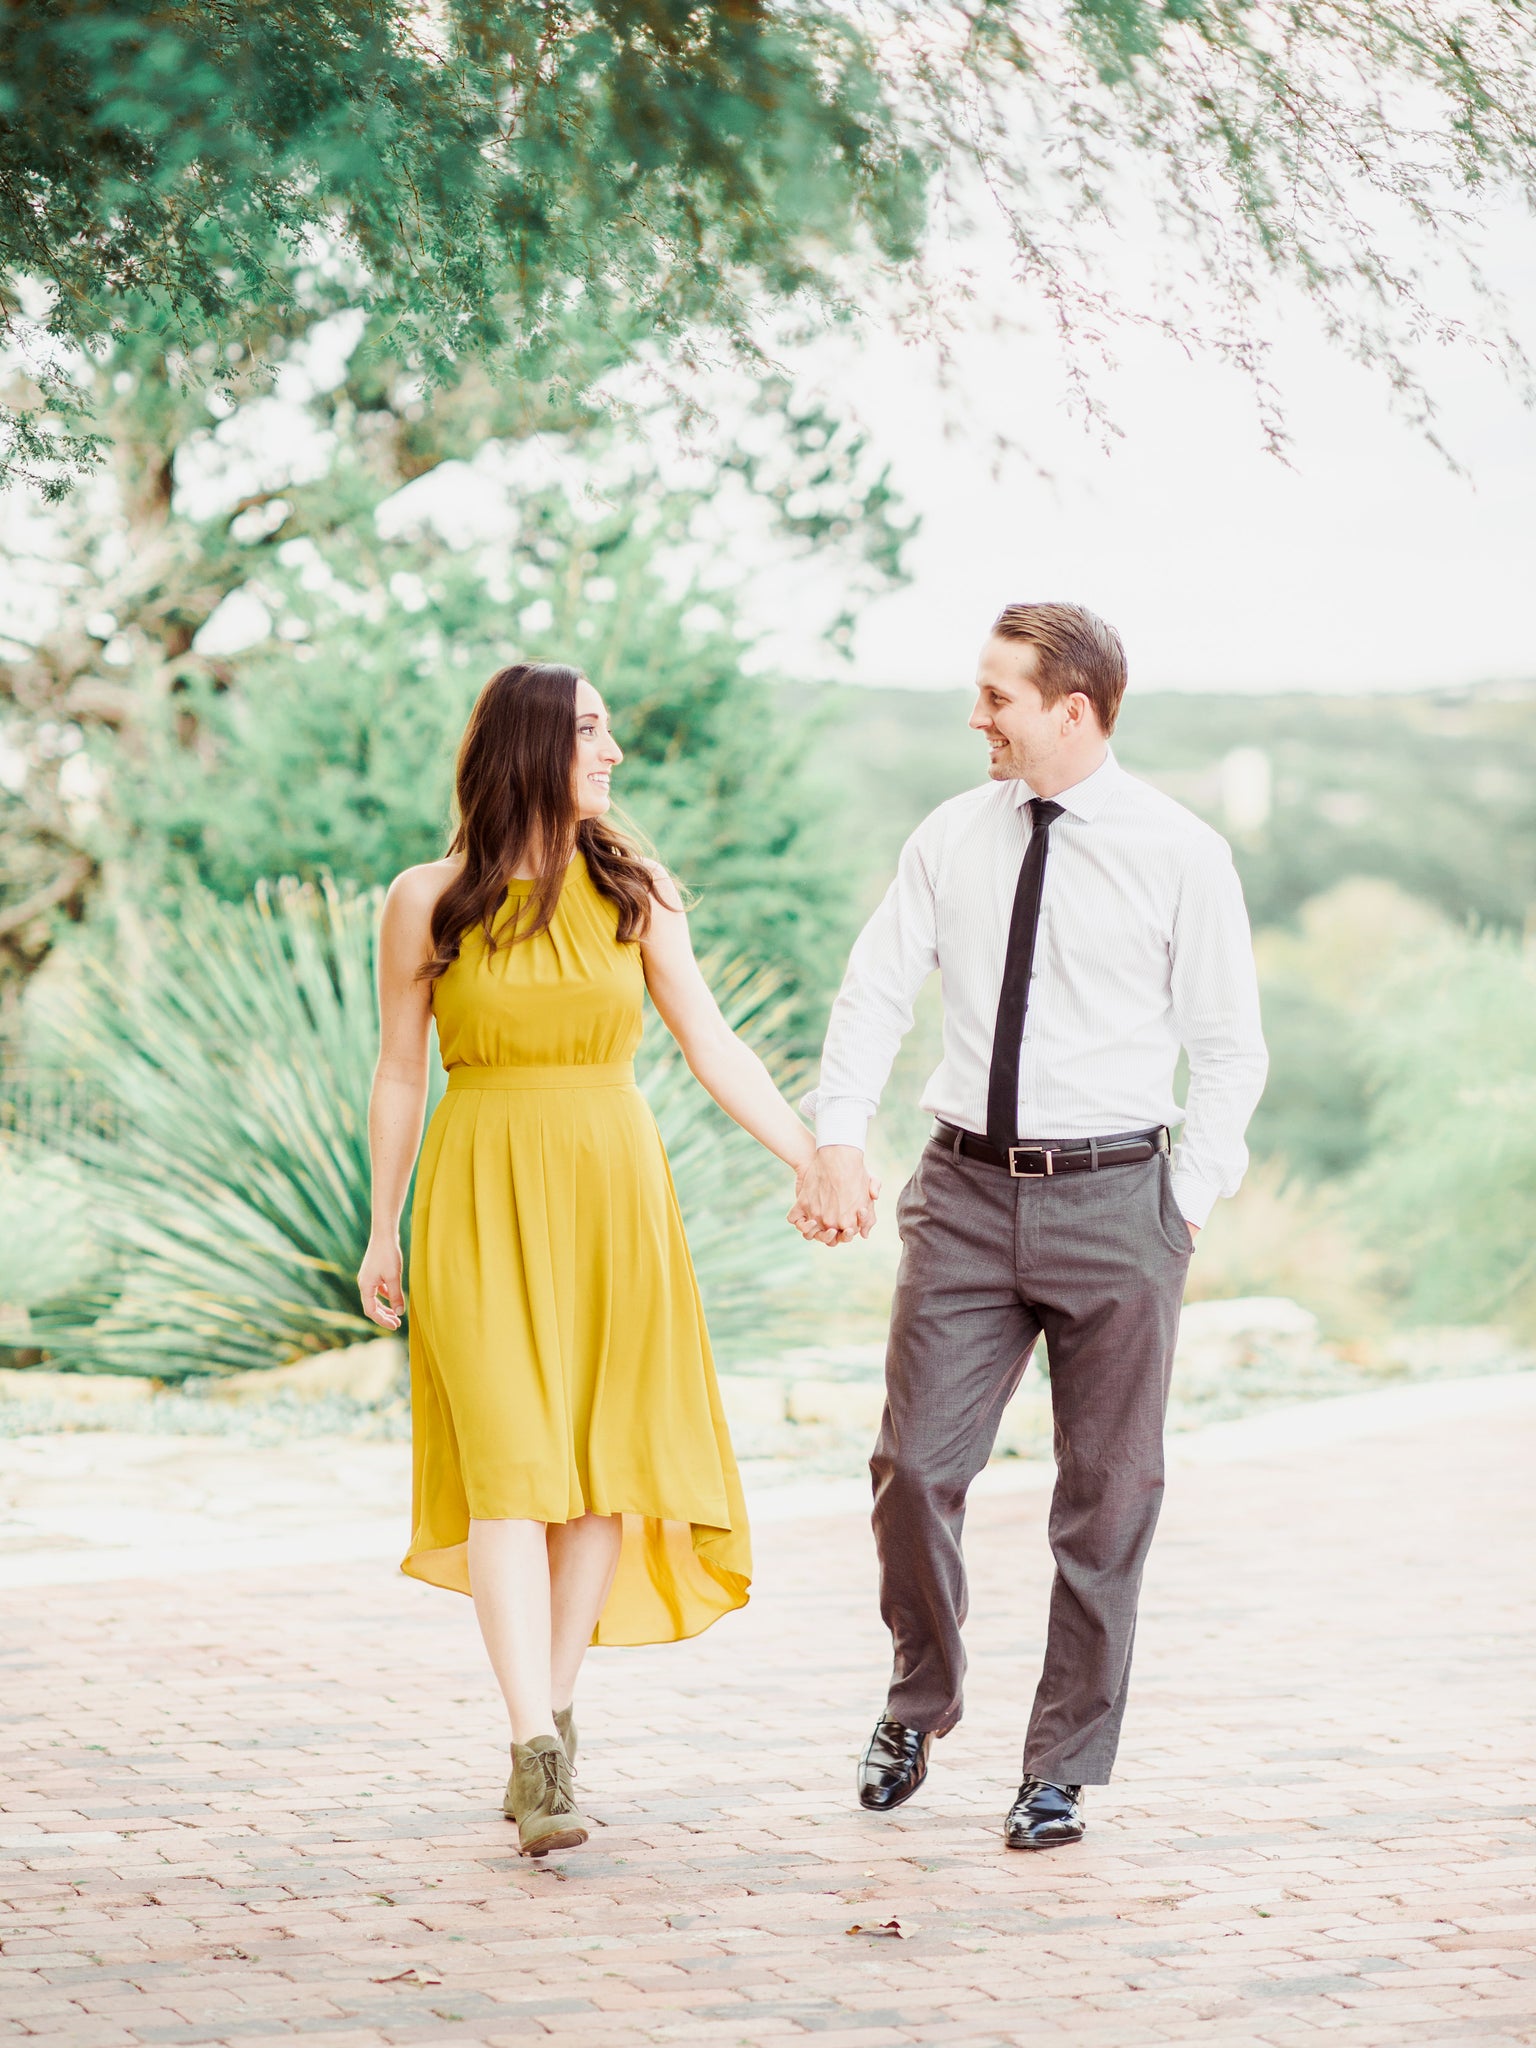 Engagement Session - Lindsey Mueller Photography